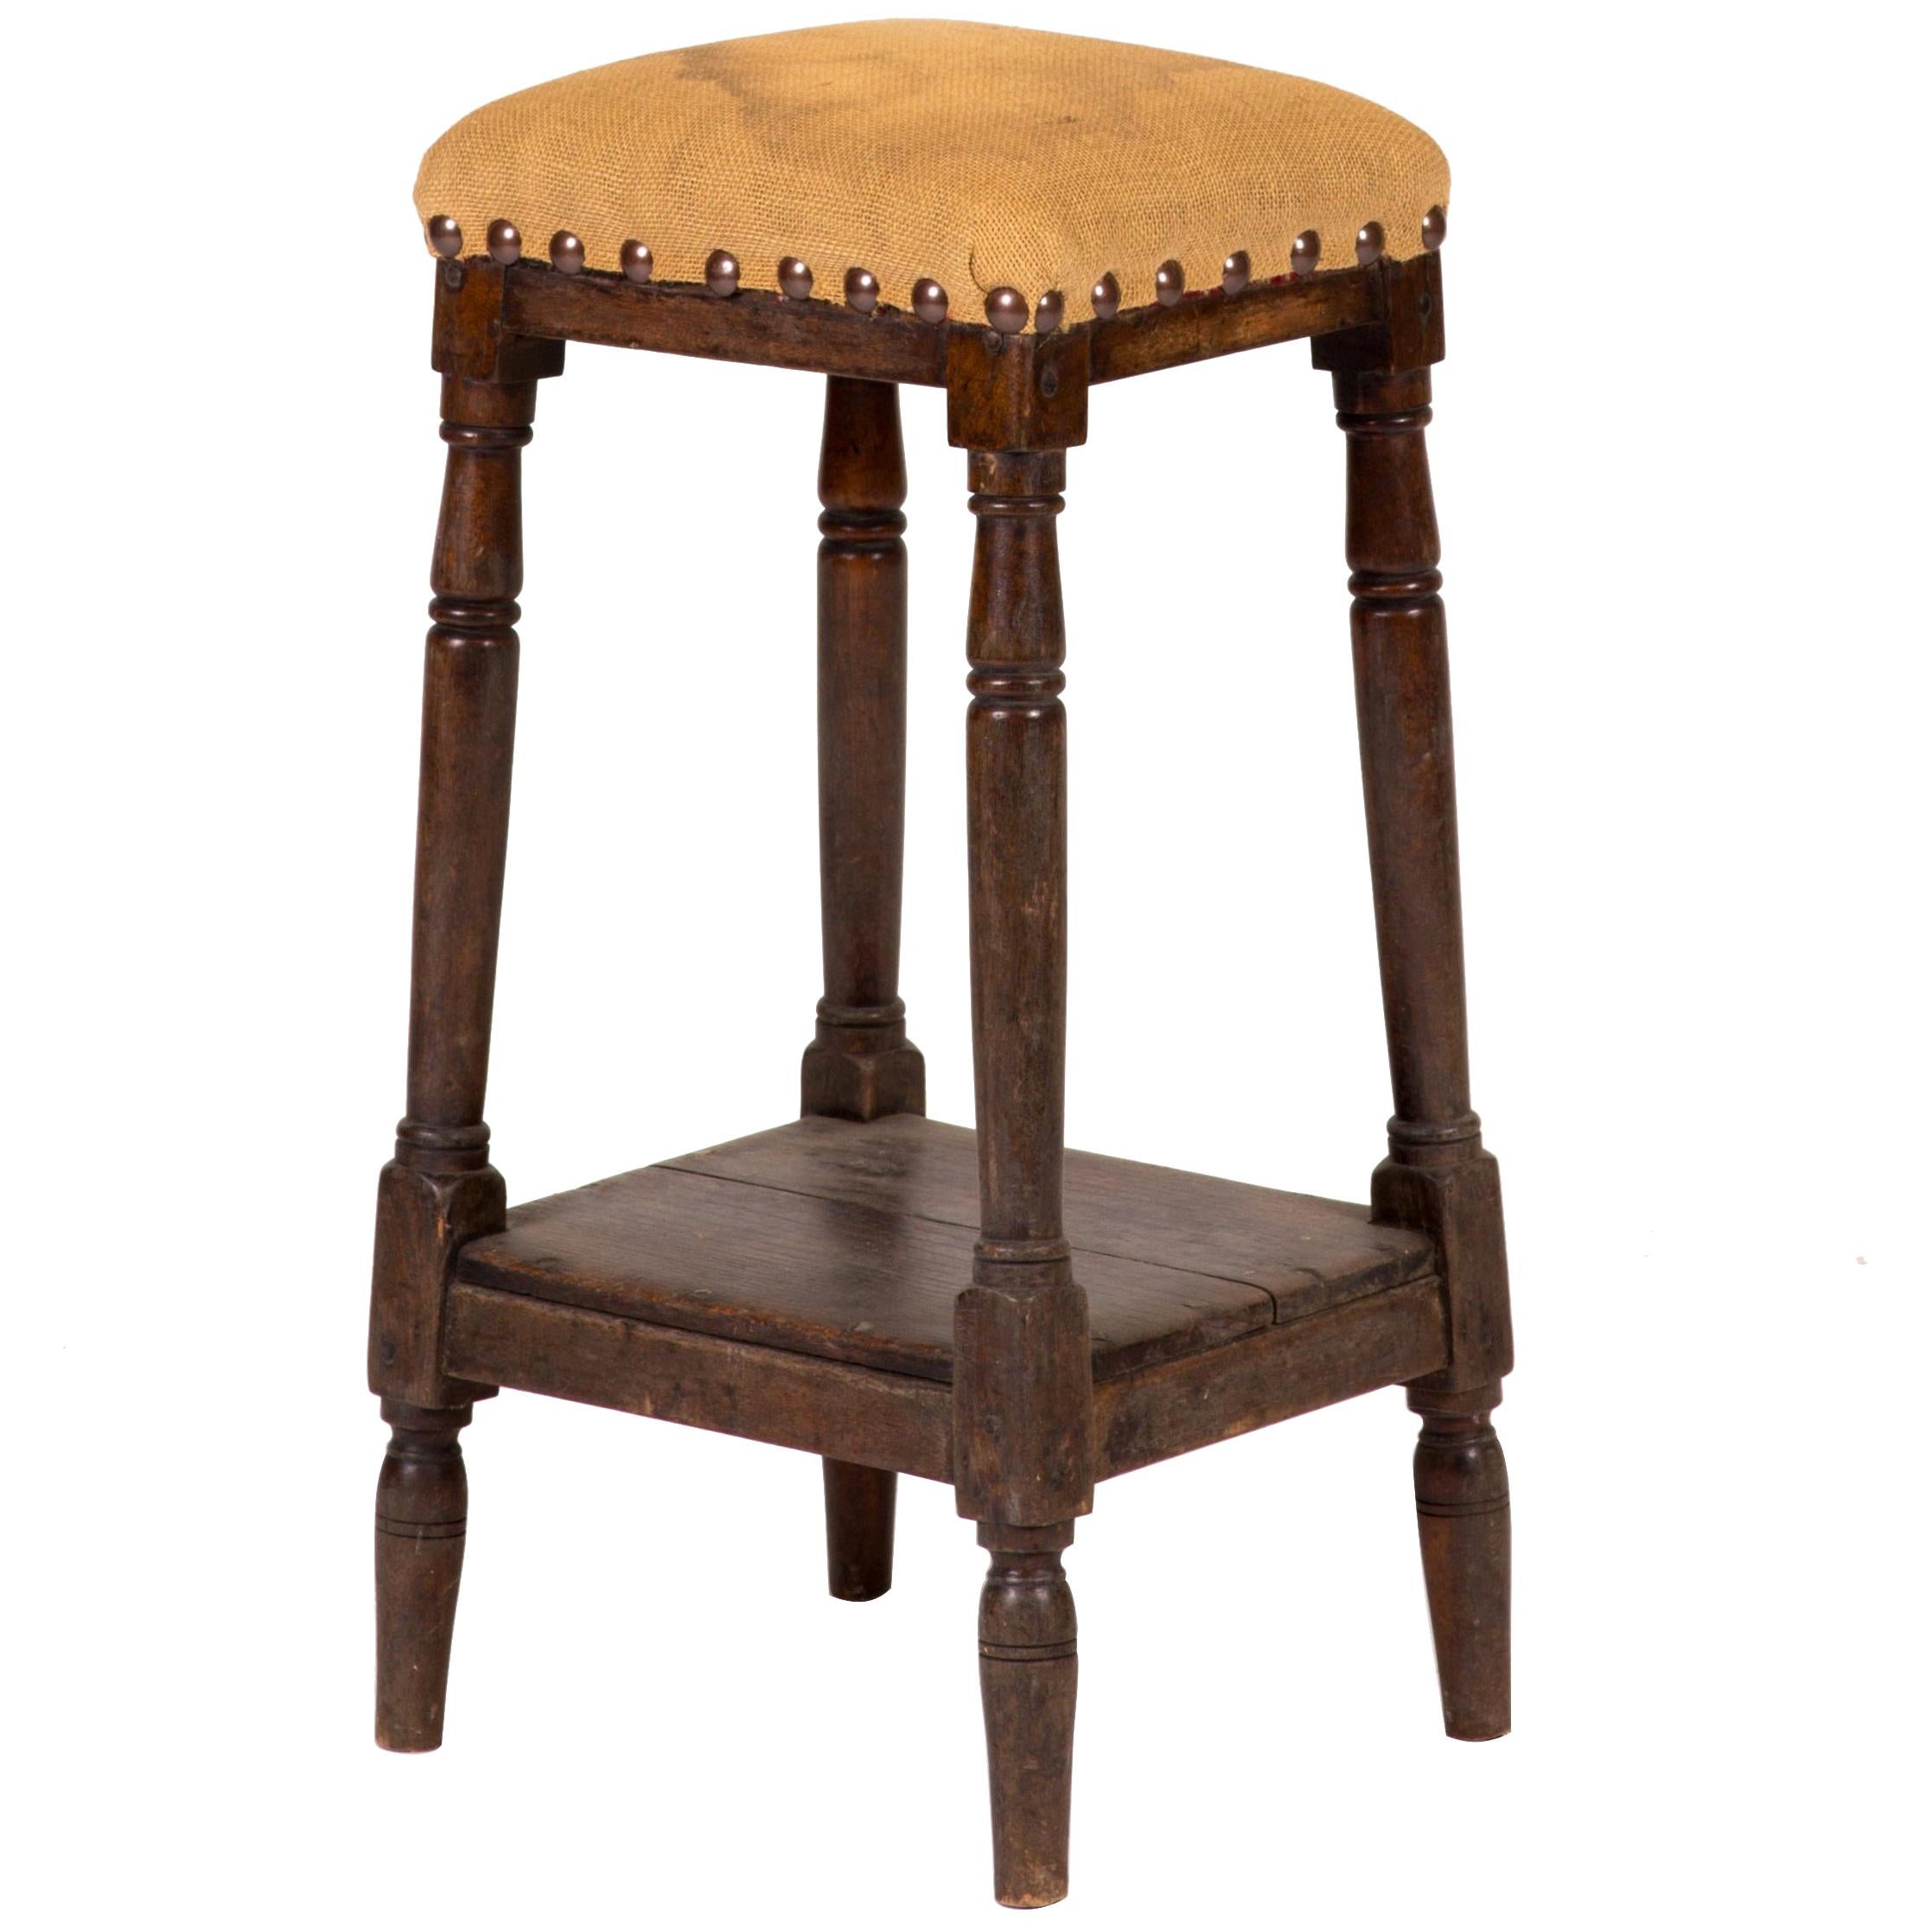 Late 19th Century Tall Upholstered English Stool with Bottom Shelf For Sale